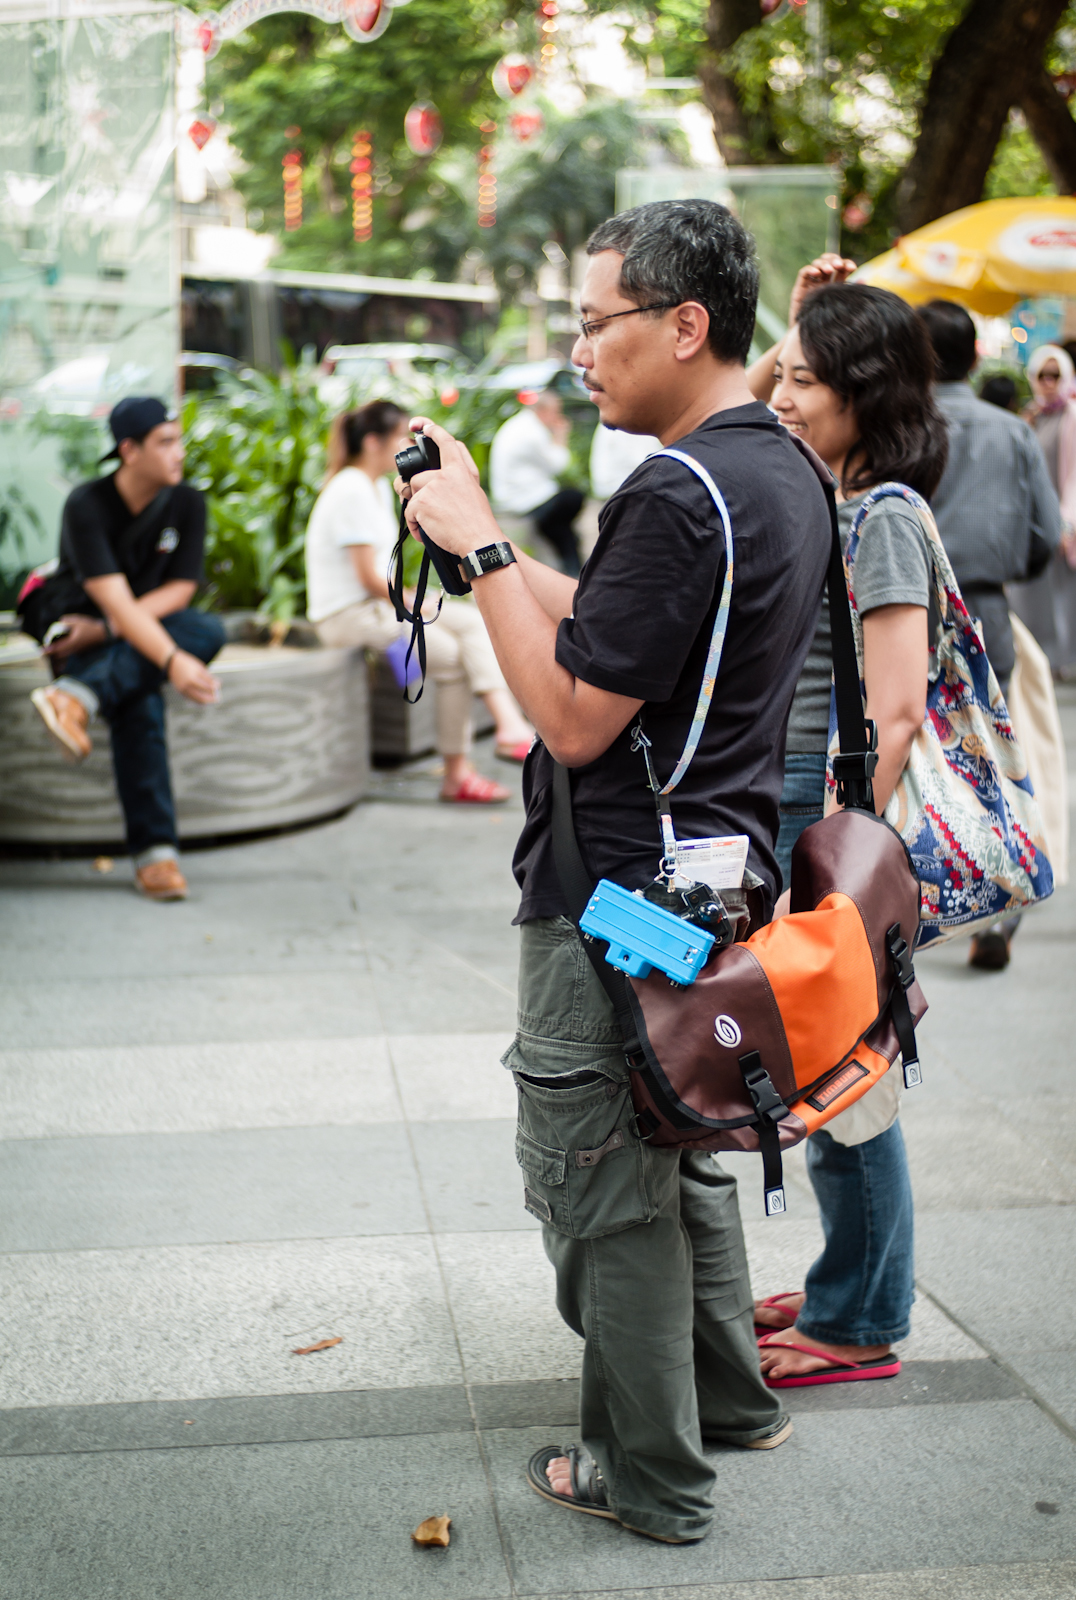 A man with cameras dangling from his bag